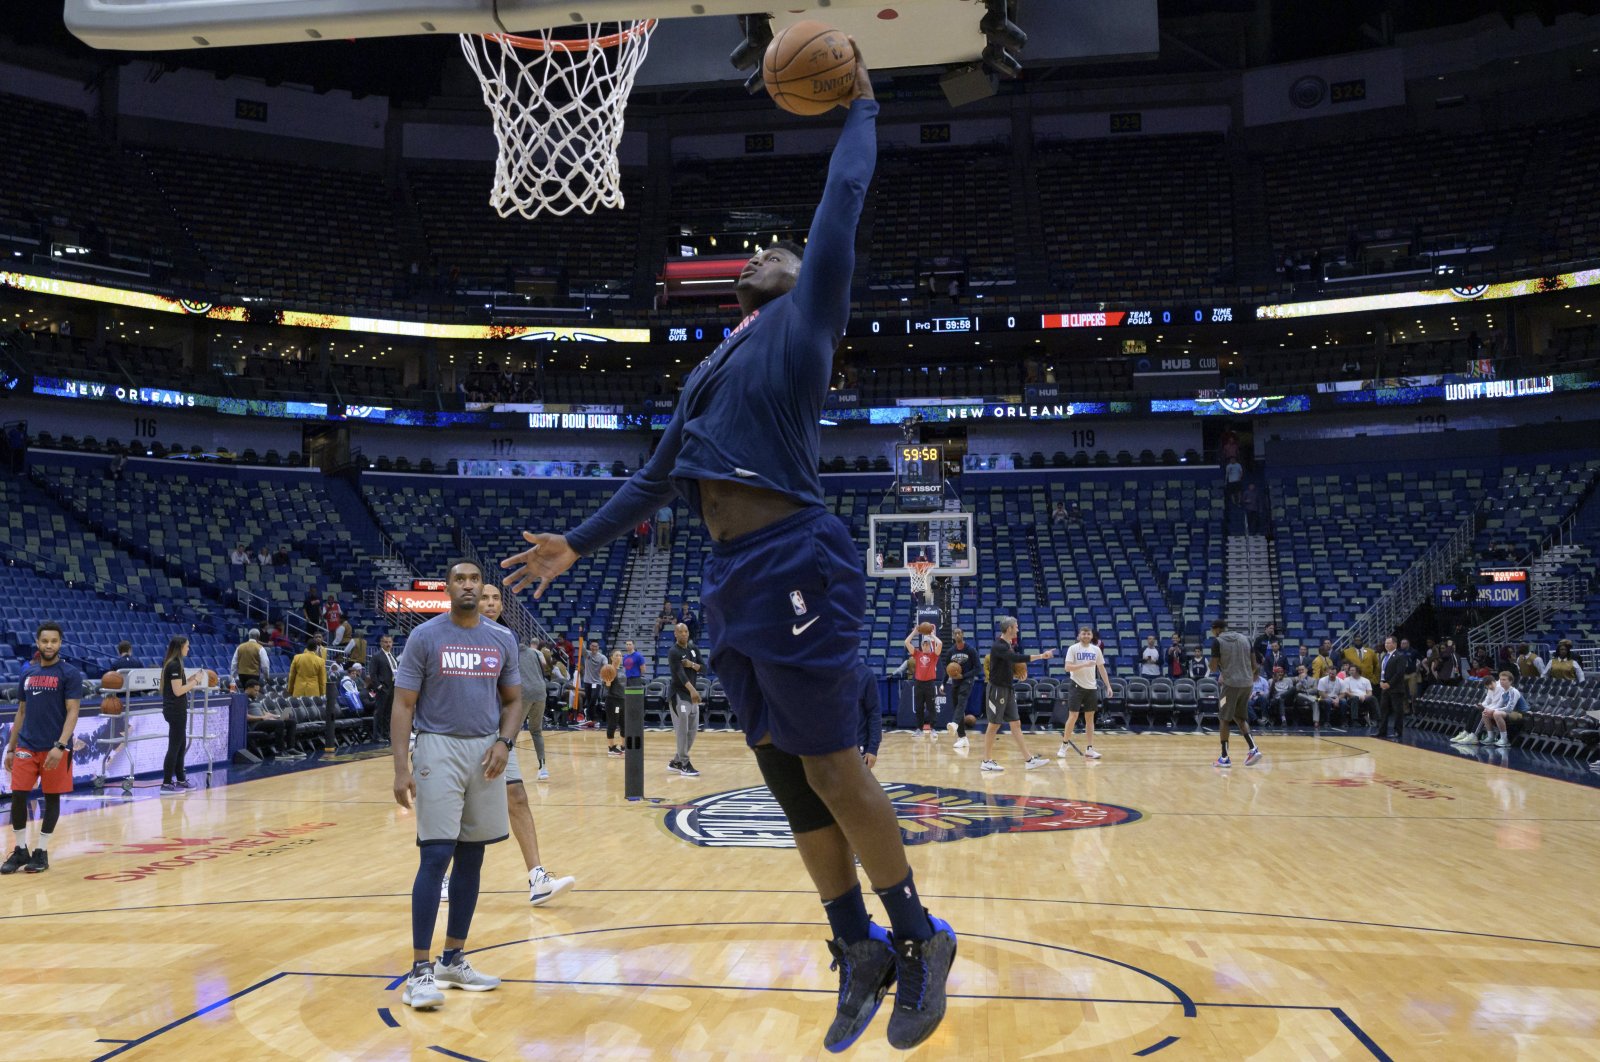 New Orleans Pelicans forward Zion Williamson practices before an NBA basketball game in New Orleans, U.S., Jan. 18, 2020. (AP Photo)